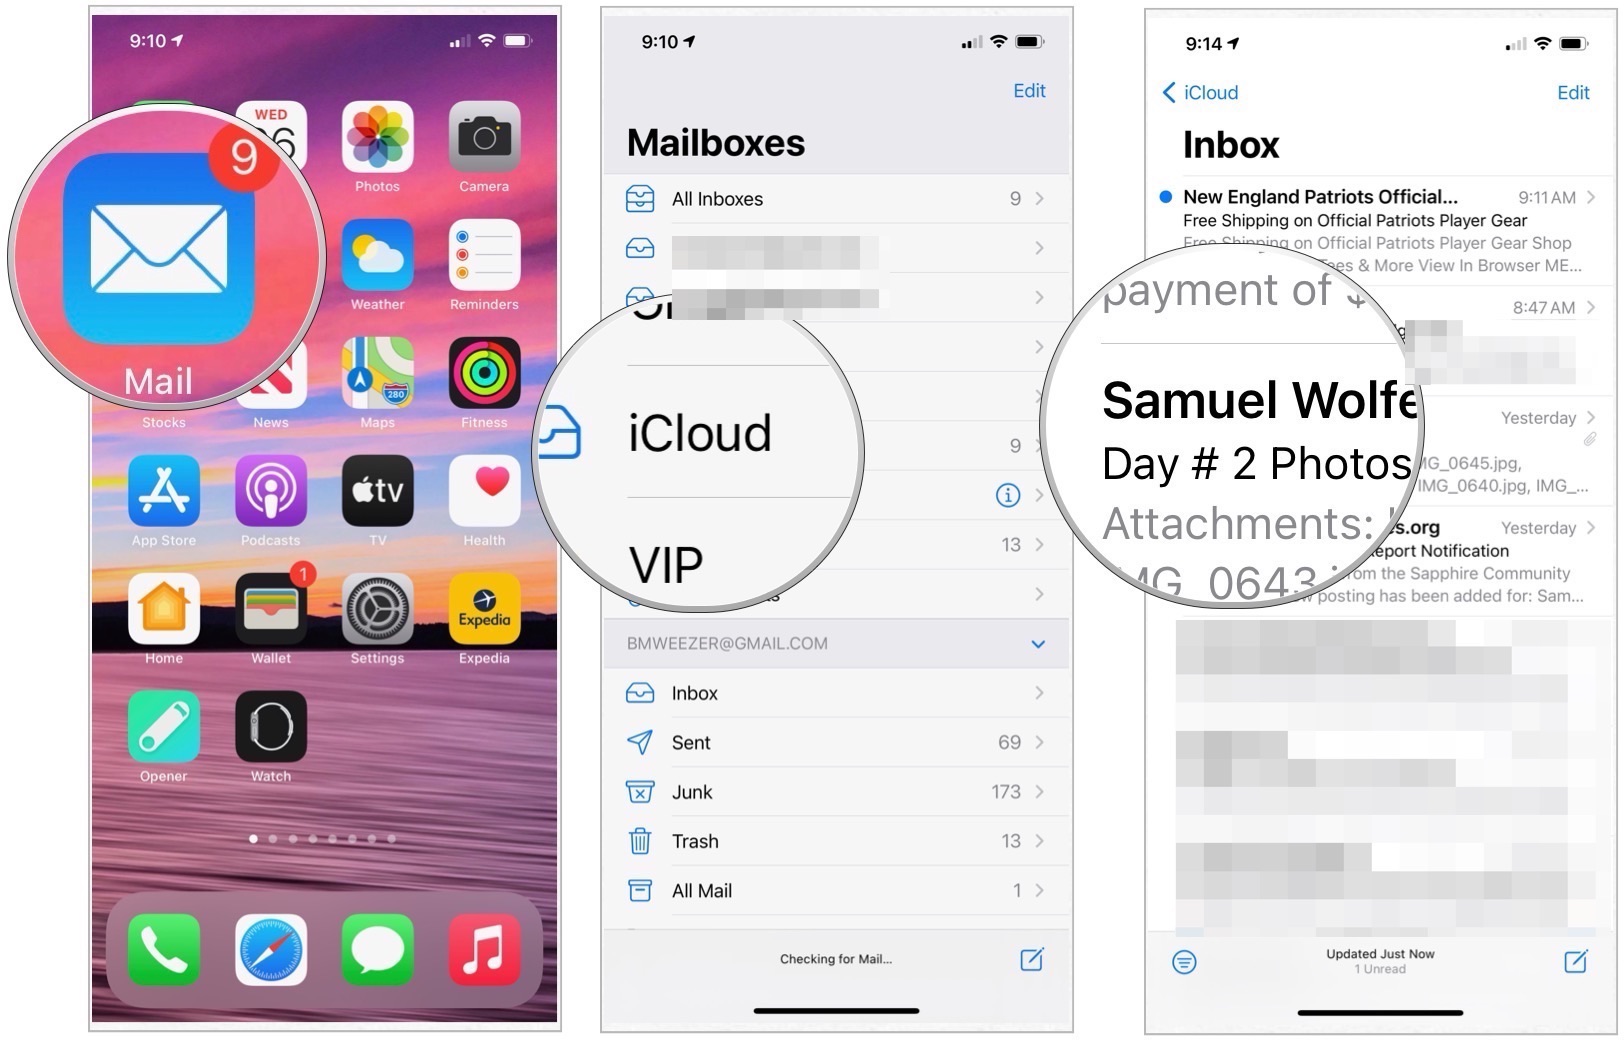 To ask Siri to respond to an email, launch the Mail app, then tap on the email. 